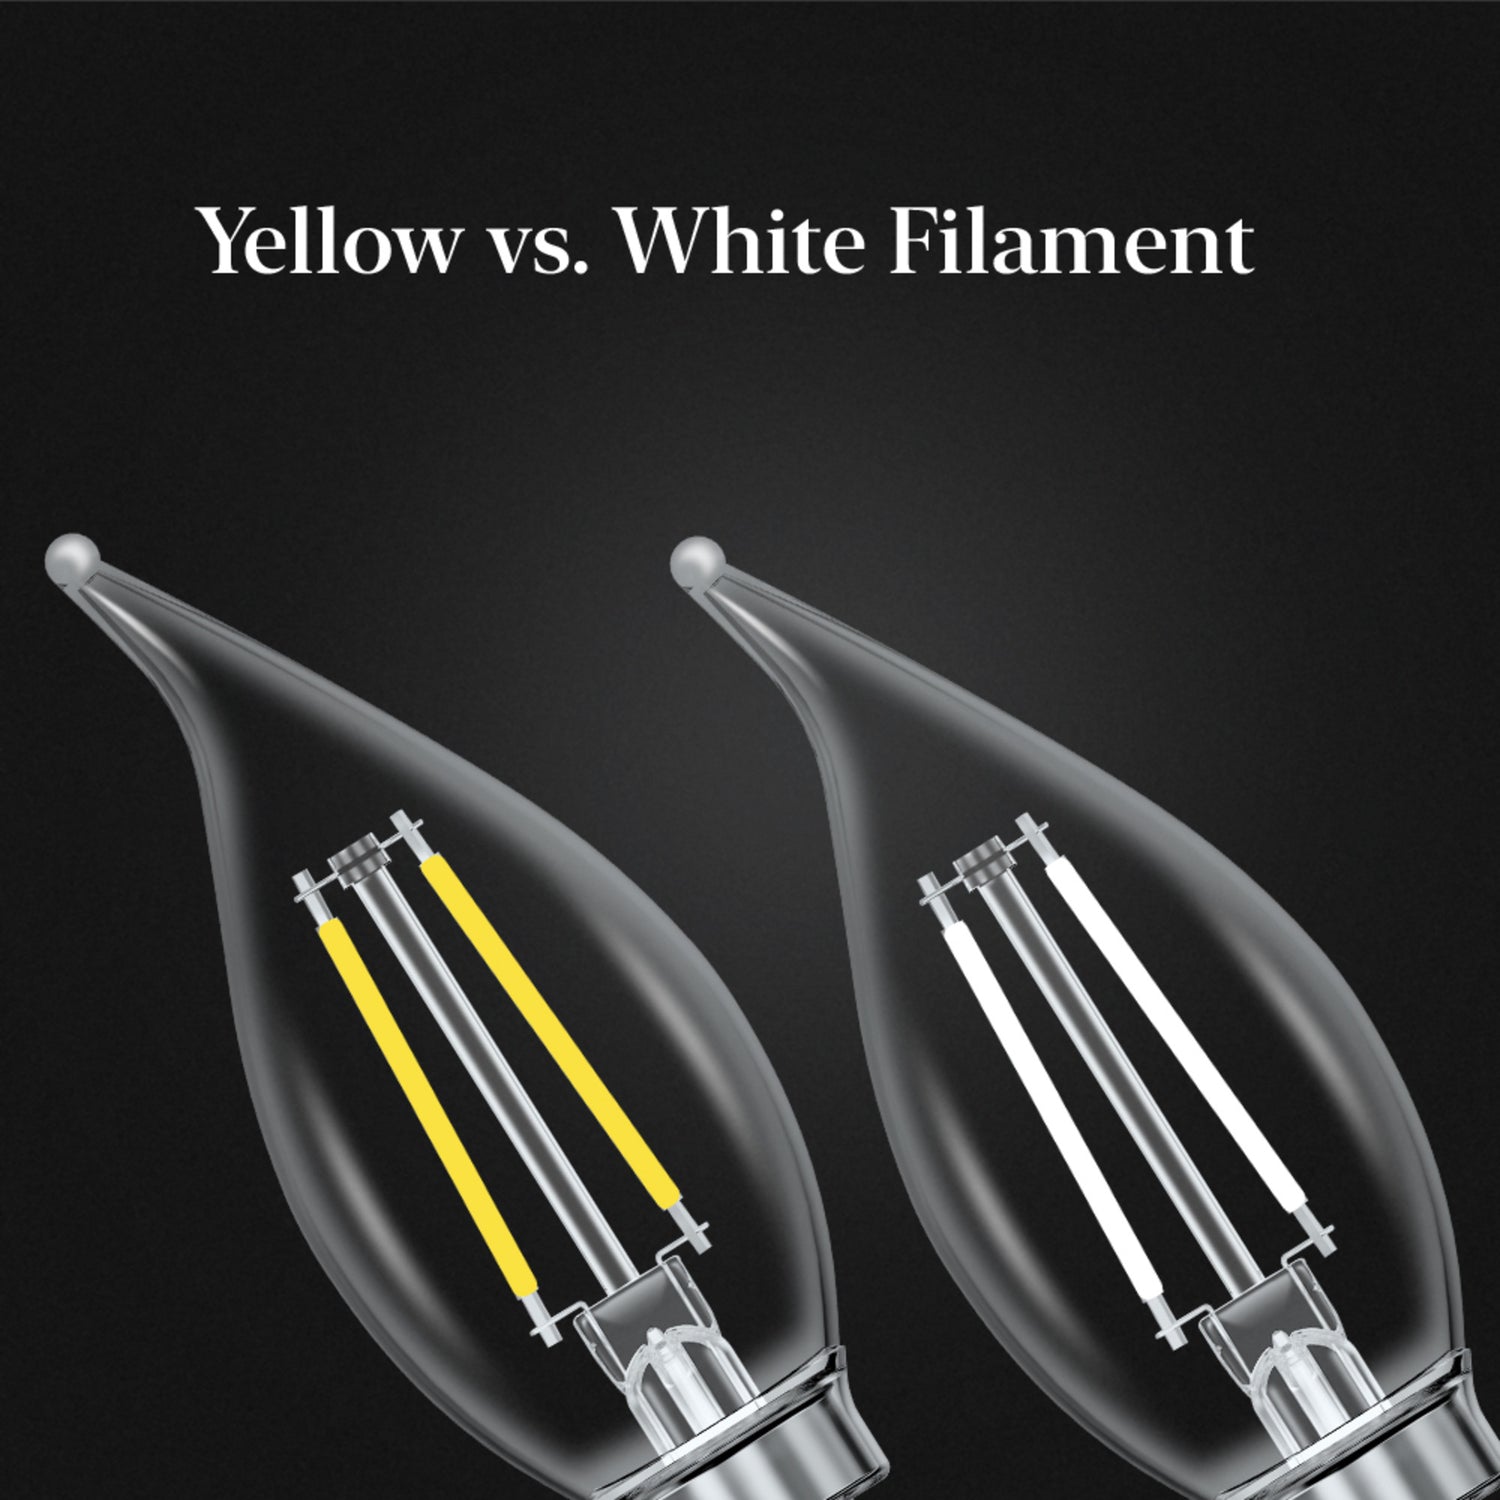 5.5W (60W Replacement) True White (3500K) Flame Tip BA10 (E12 Base) Exposed White Filament LED Bulb (3-Pack)